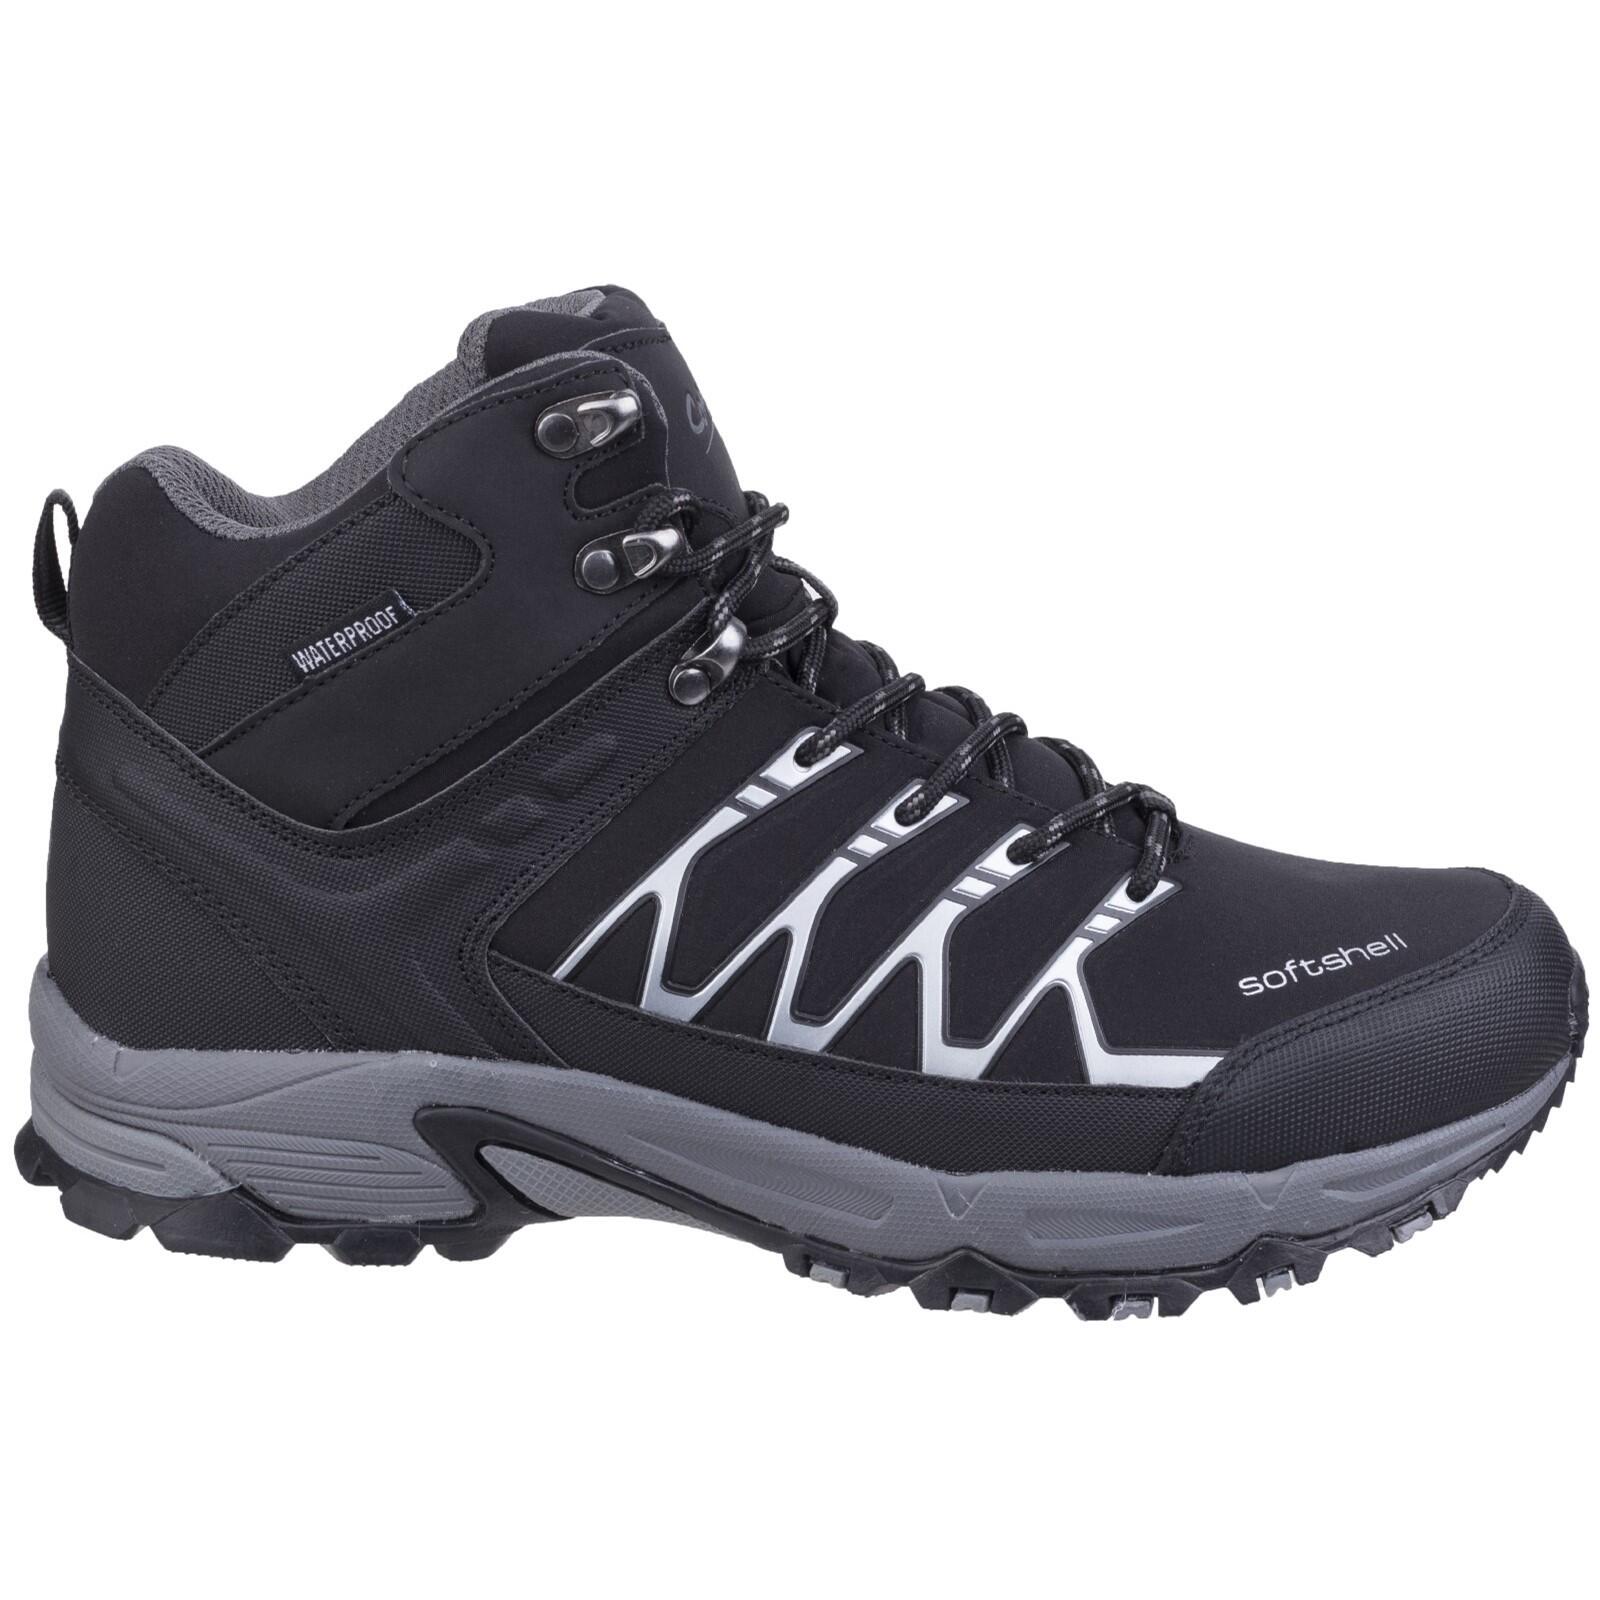 COTSWOLD Abbeydale Mid Mens Hiking Boots BLACK